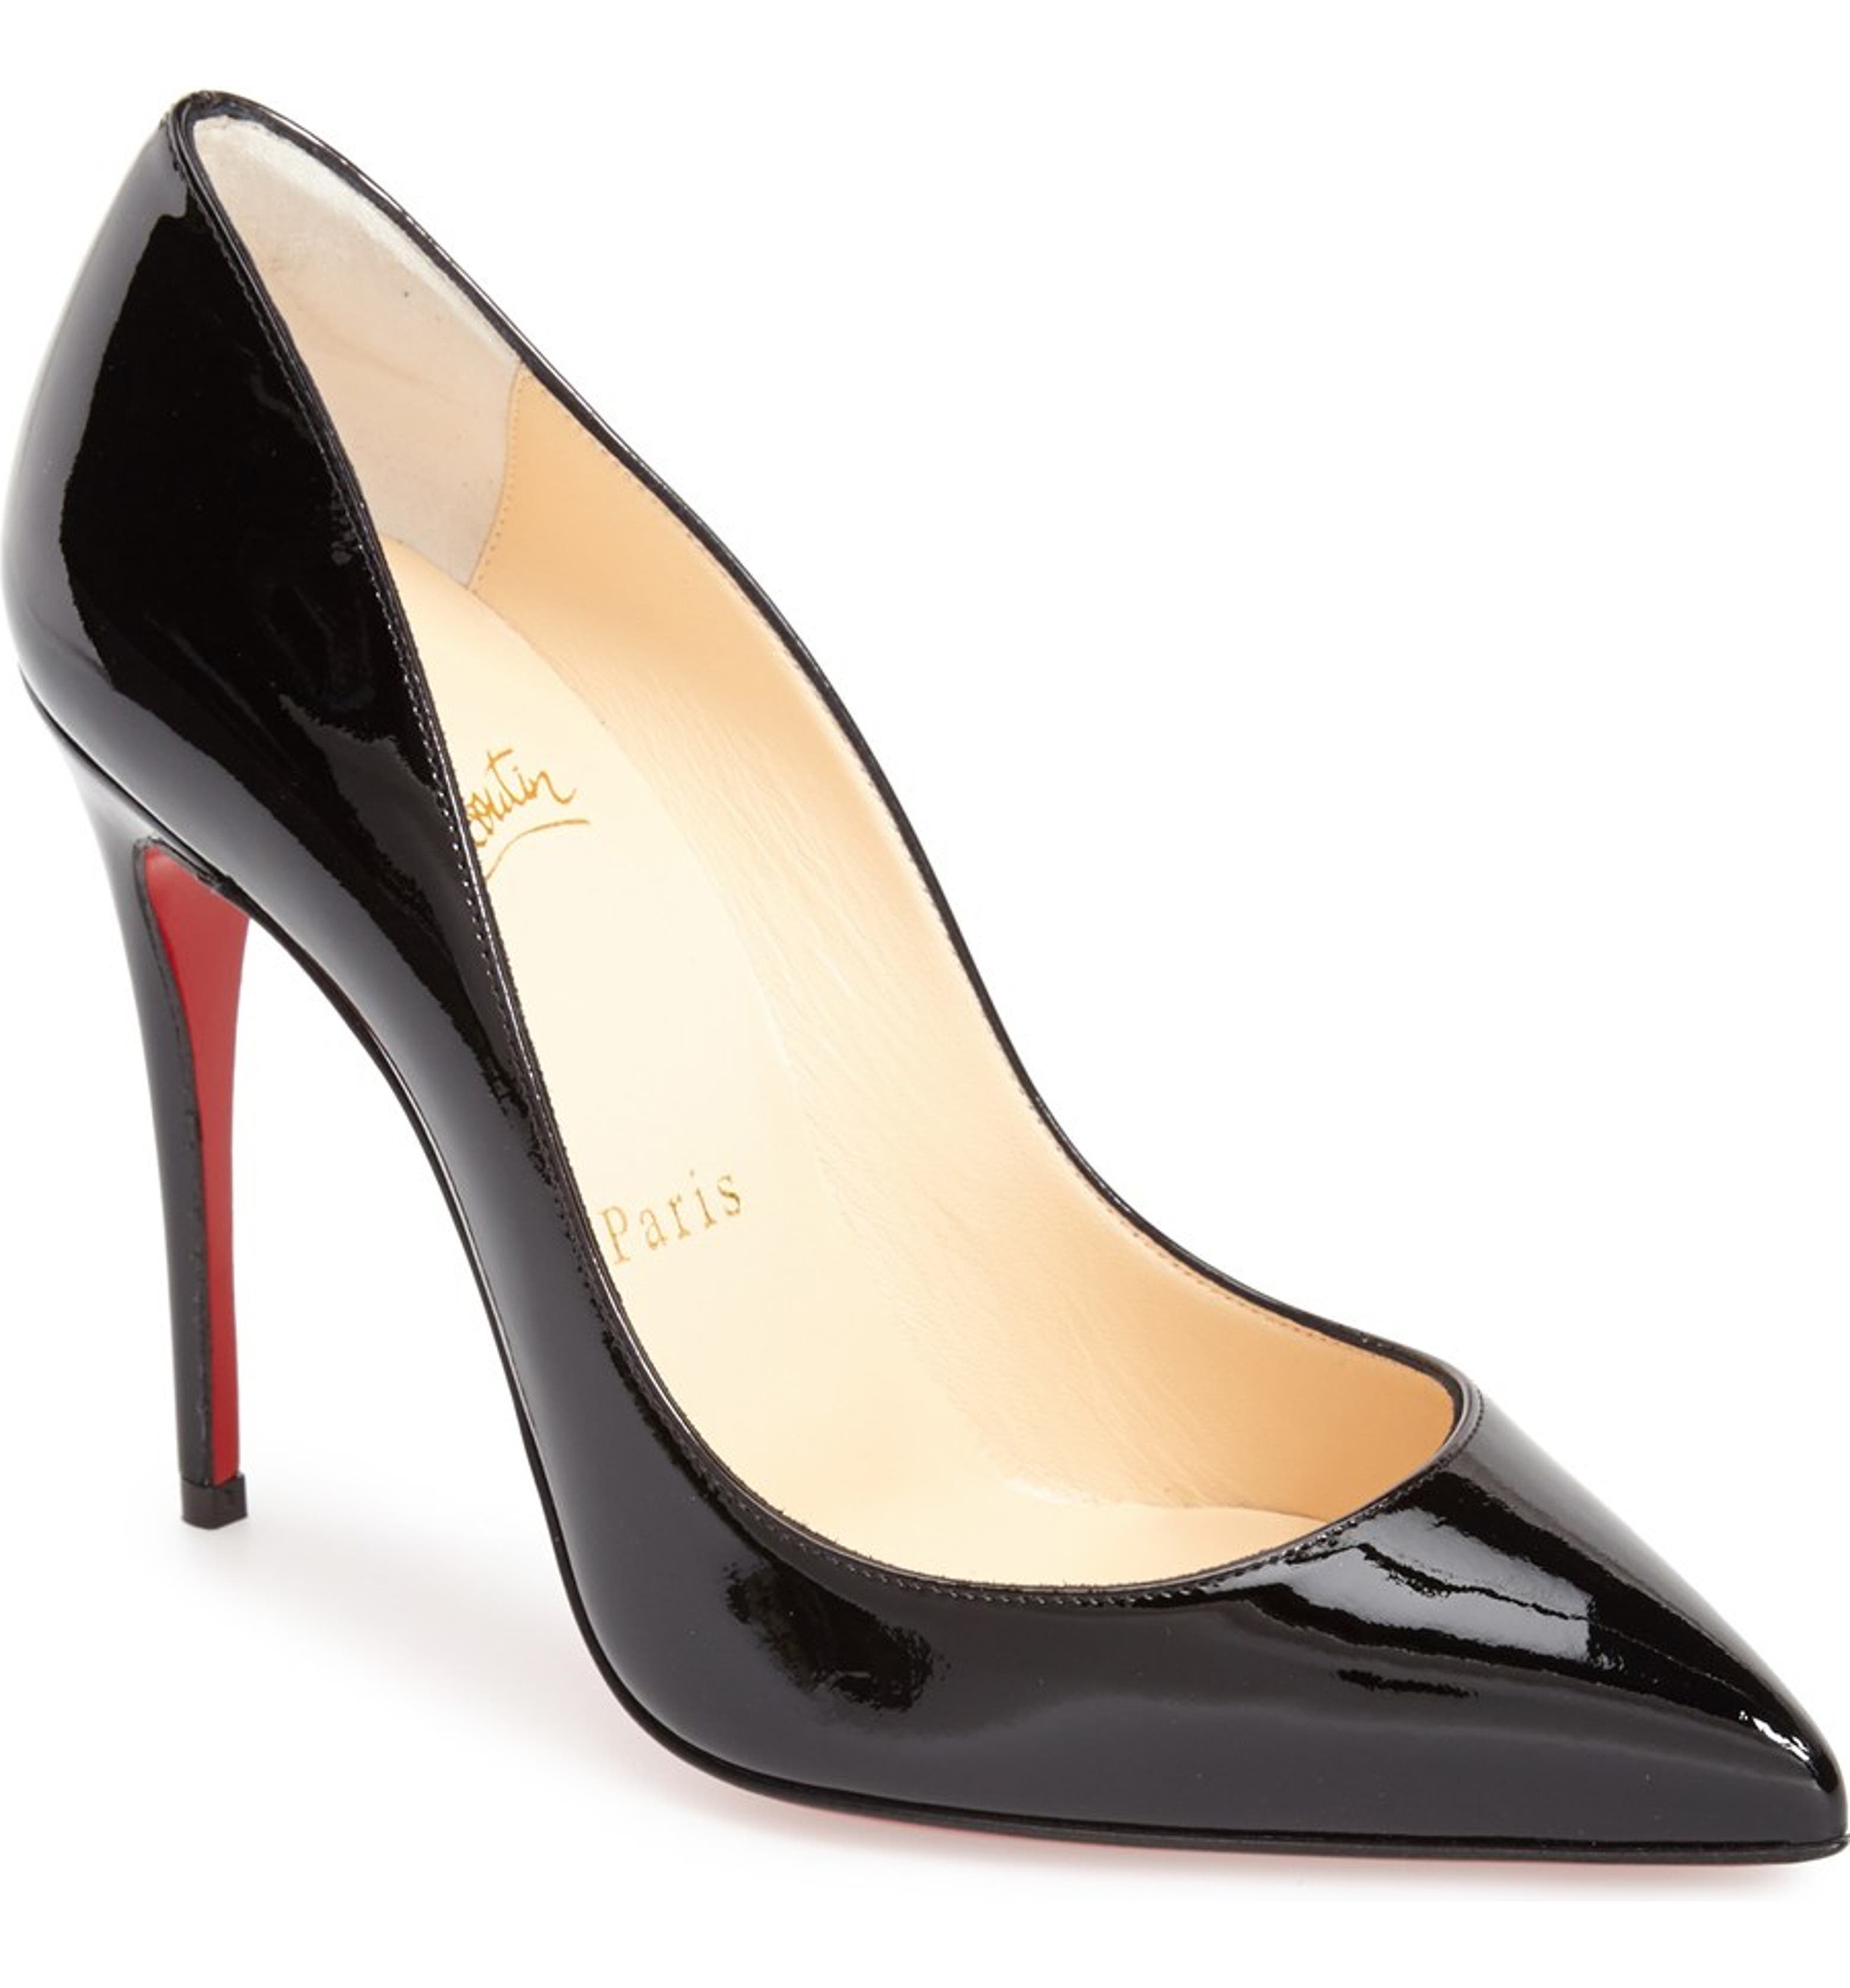 Christian Louboutin Pigalle Follies Pointy Toe Pump | Nordstrom